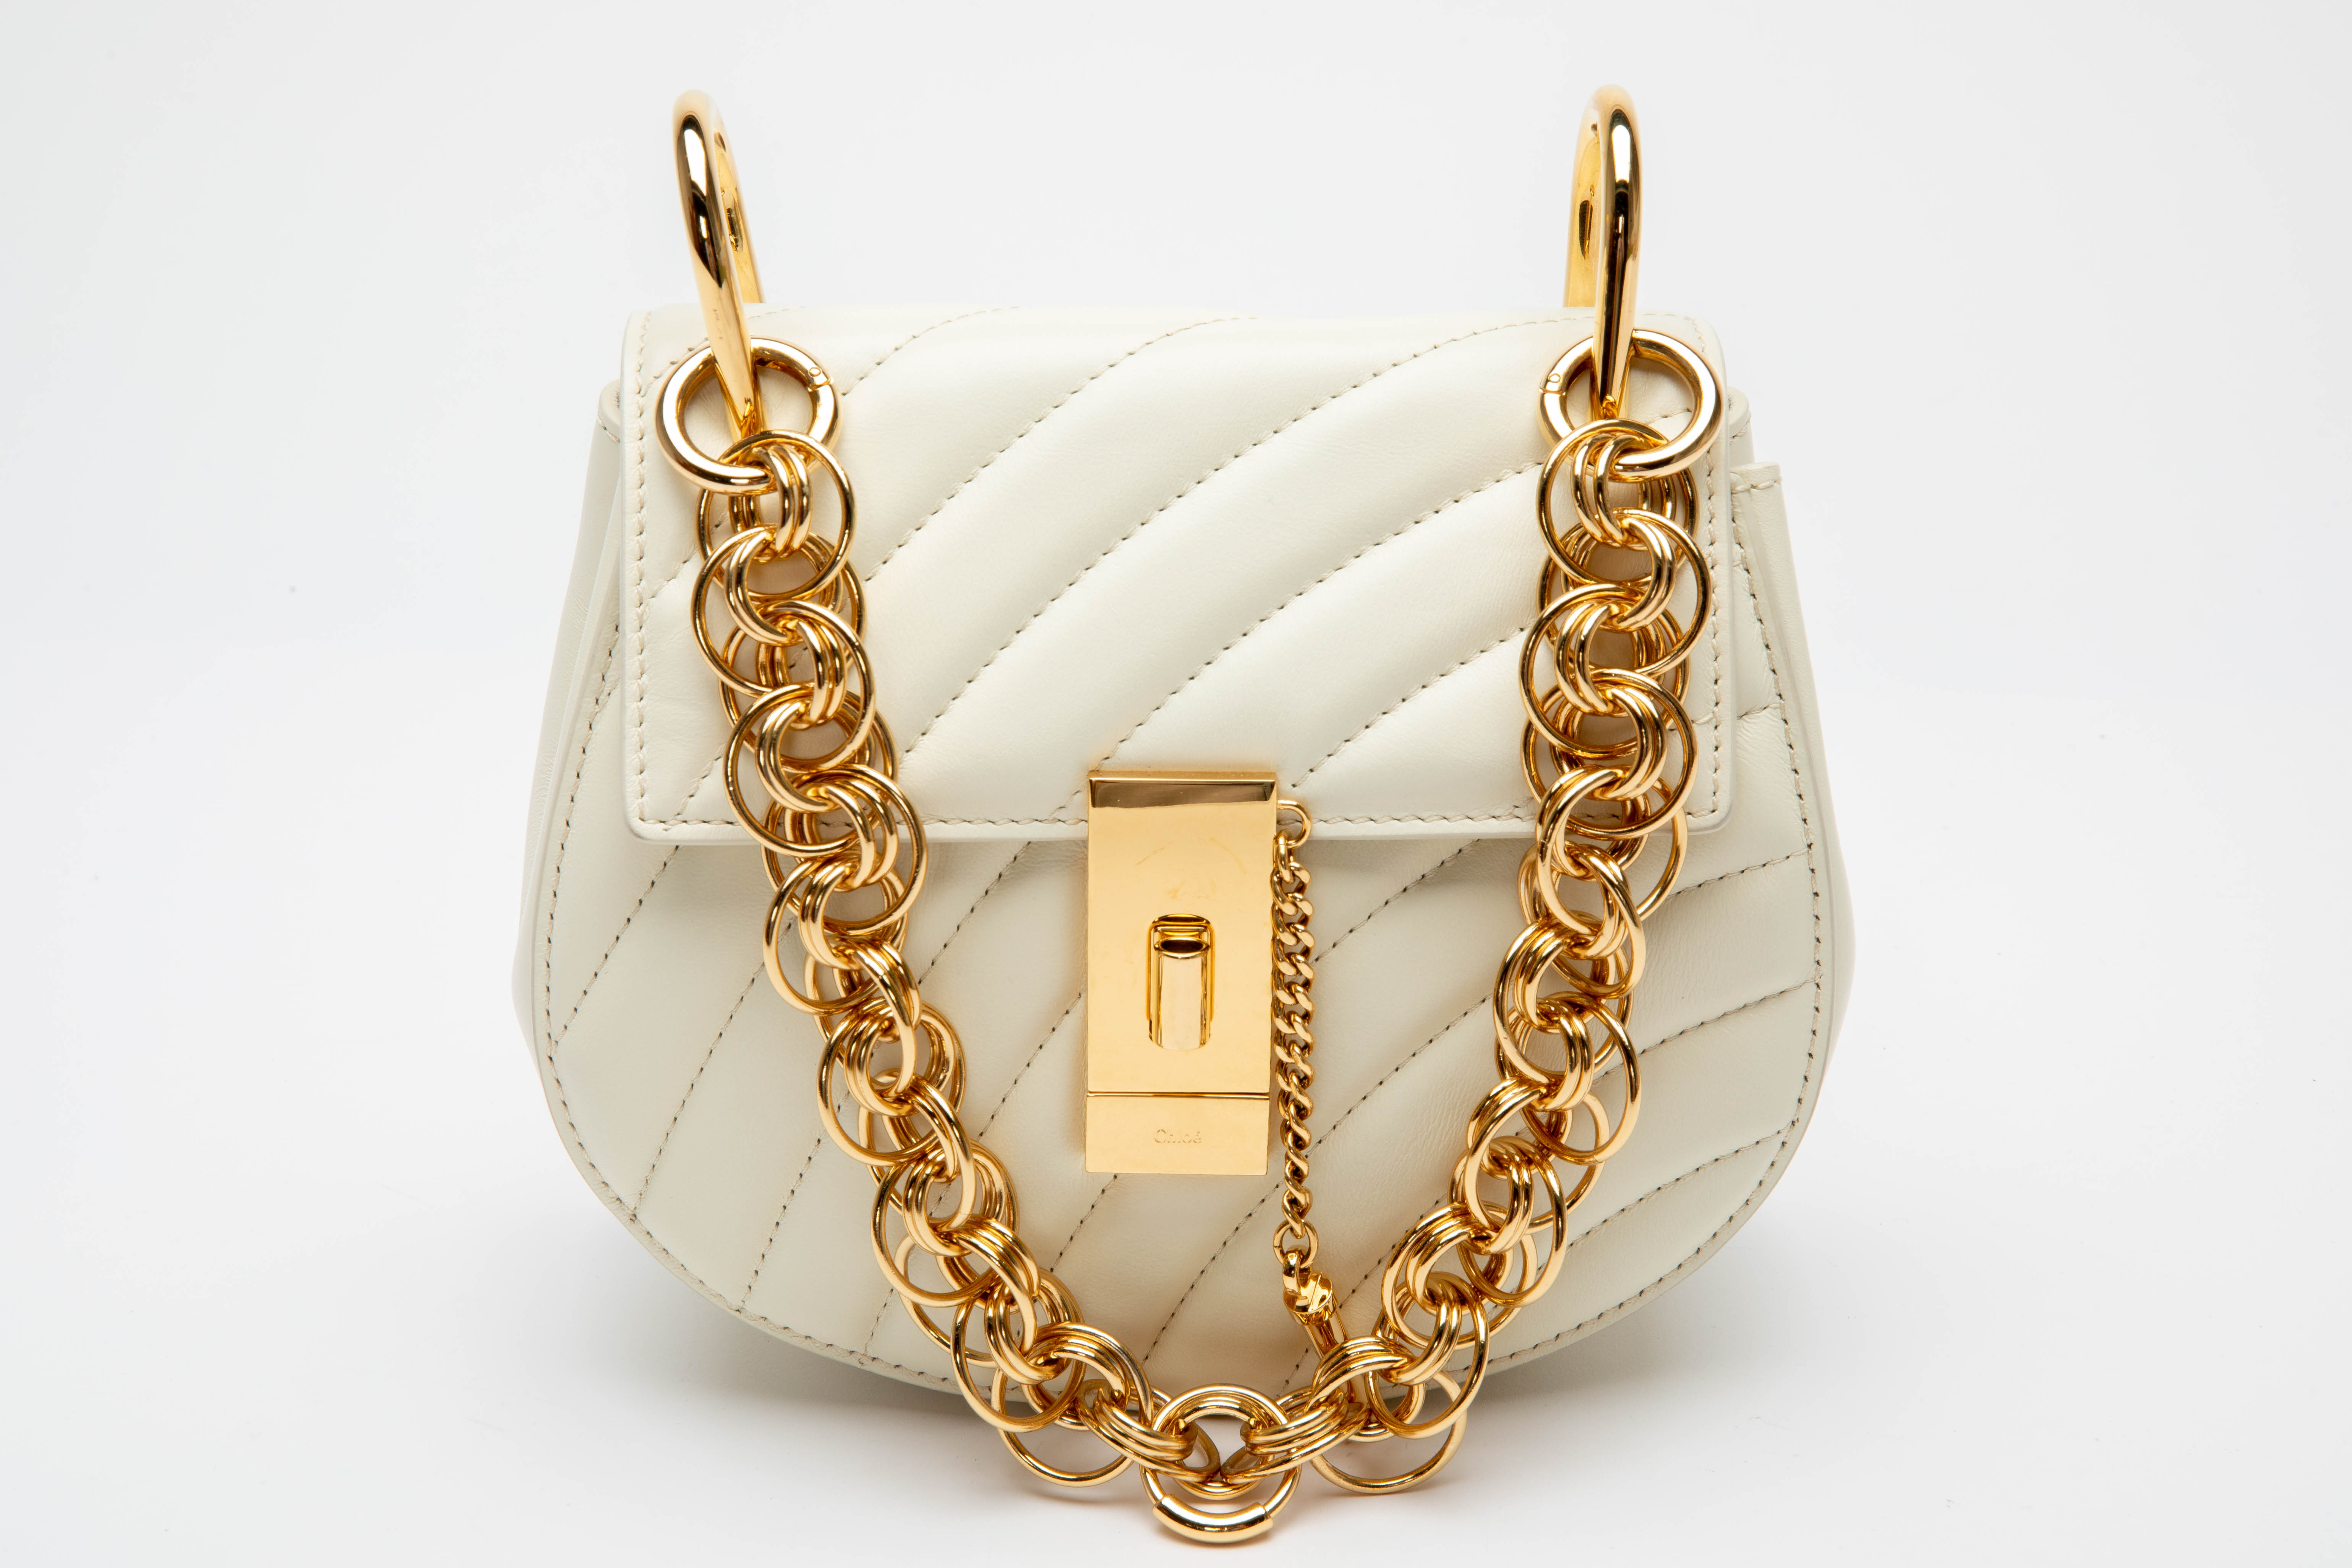 A CHLOE DREW BIJOU QUILTED WHITE LEATHER CROSSBODY BAG - Image 5 of 5